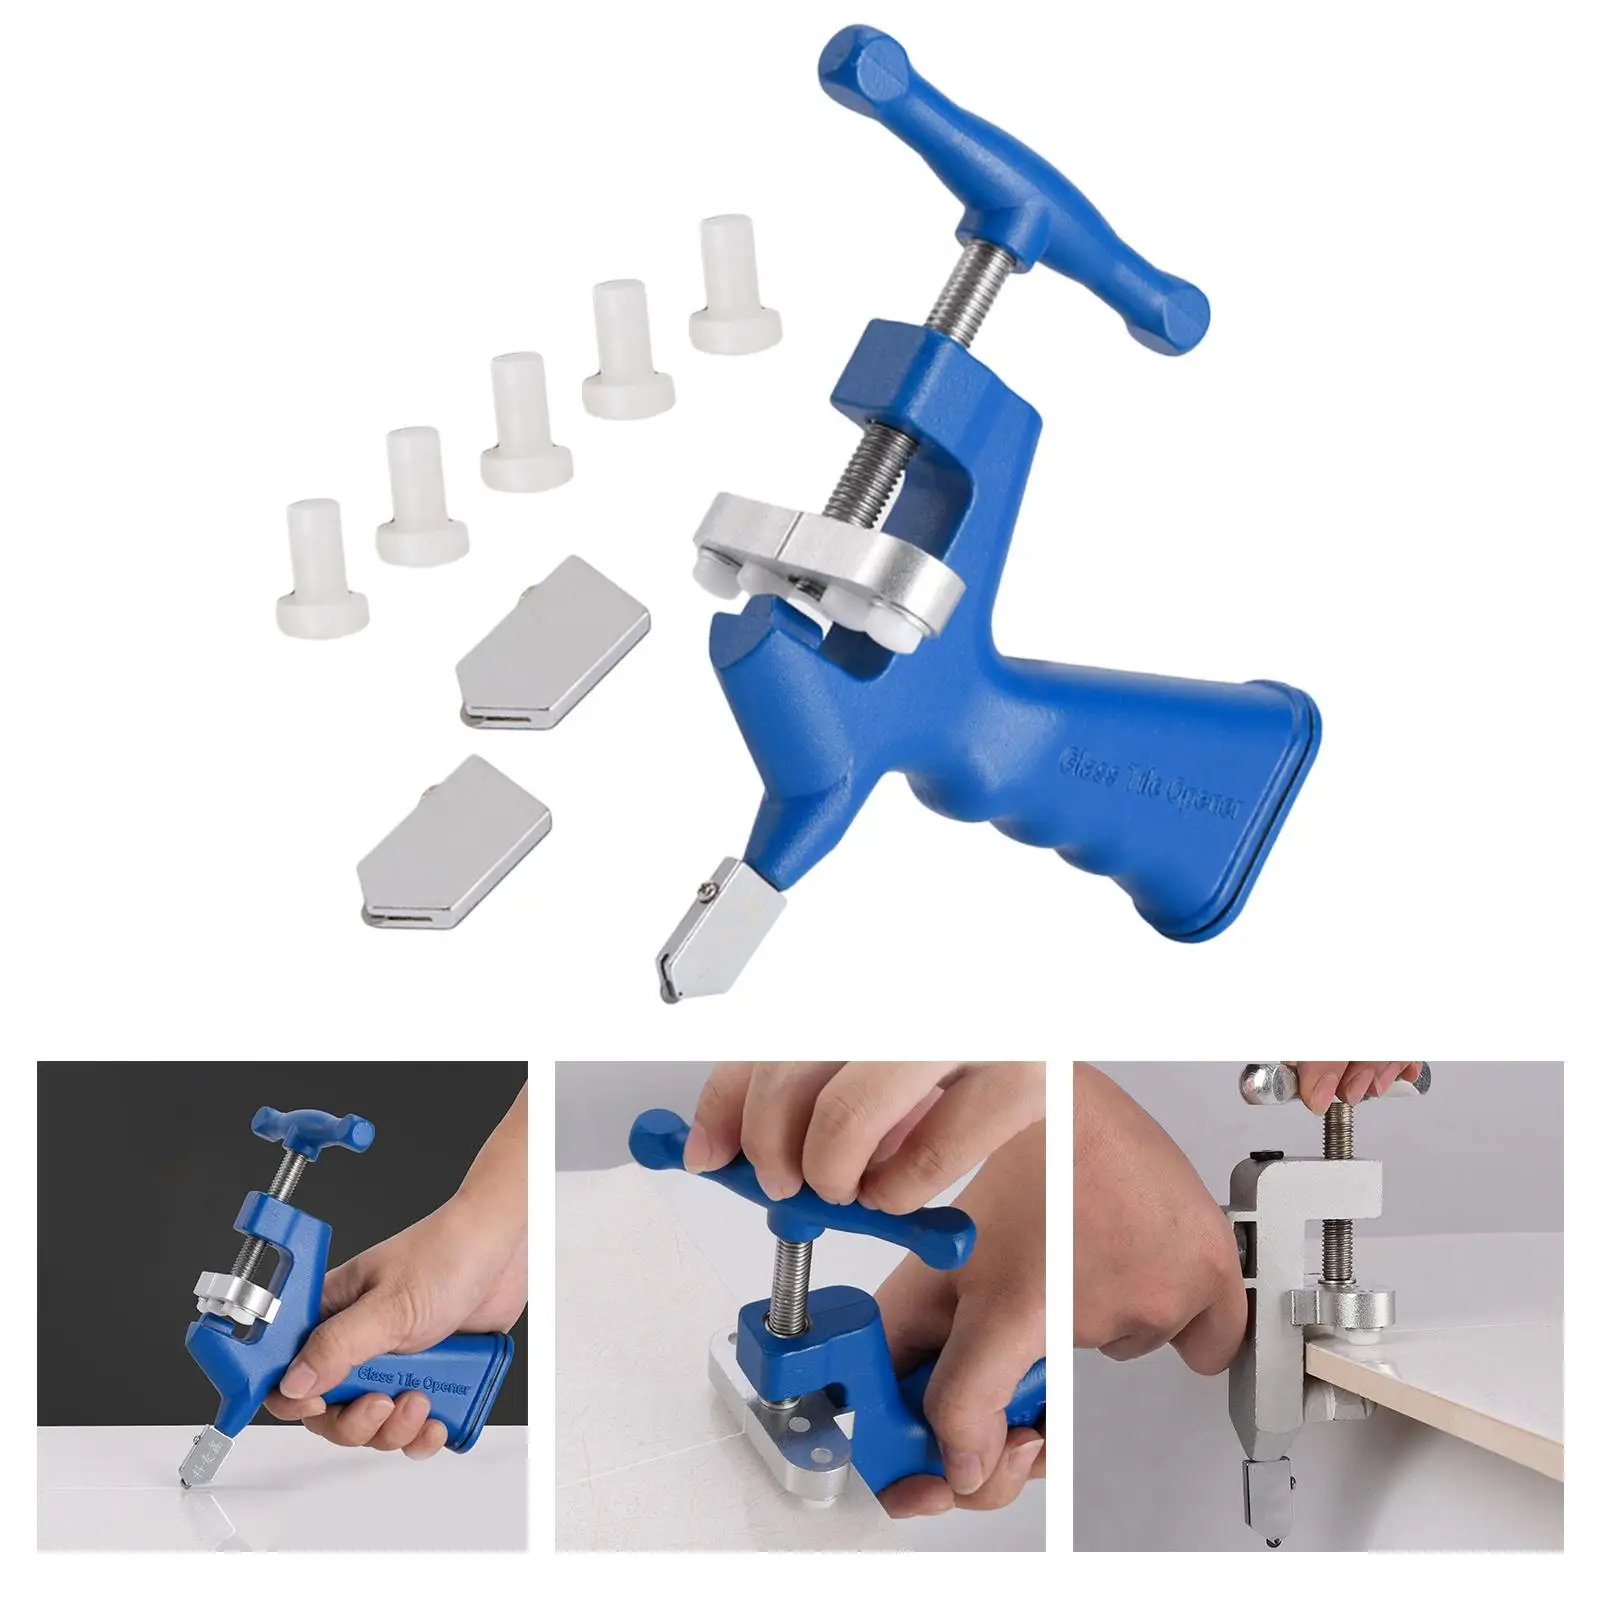  Glass Cutter Tool Portable  with Breaking Pliers Roller  Professional Opener for Windows, Tile, Mirror, Cutting Tool Mosaic